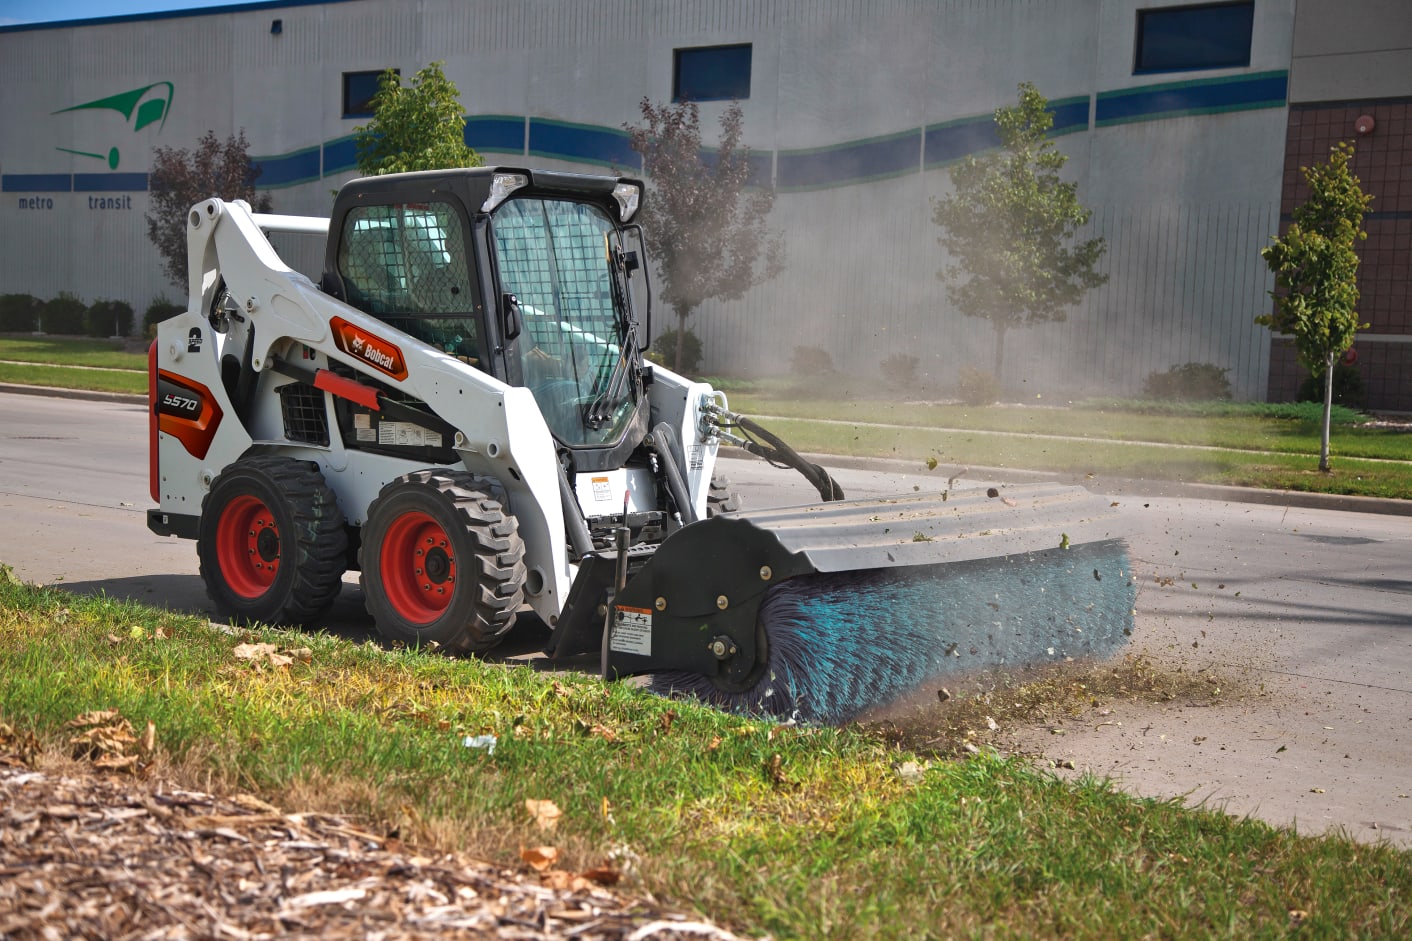 Browse Specs and more for the S570 Skid-Steer Loader - Bobcat of North Texas